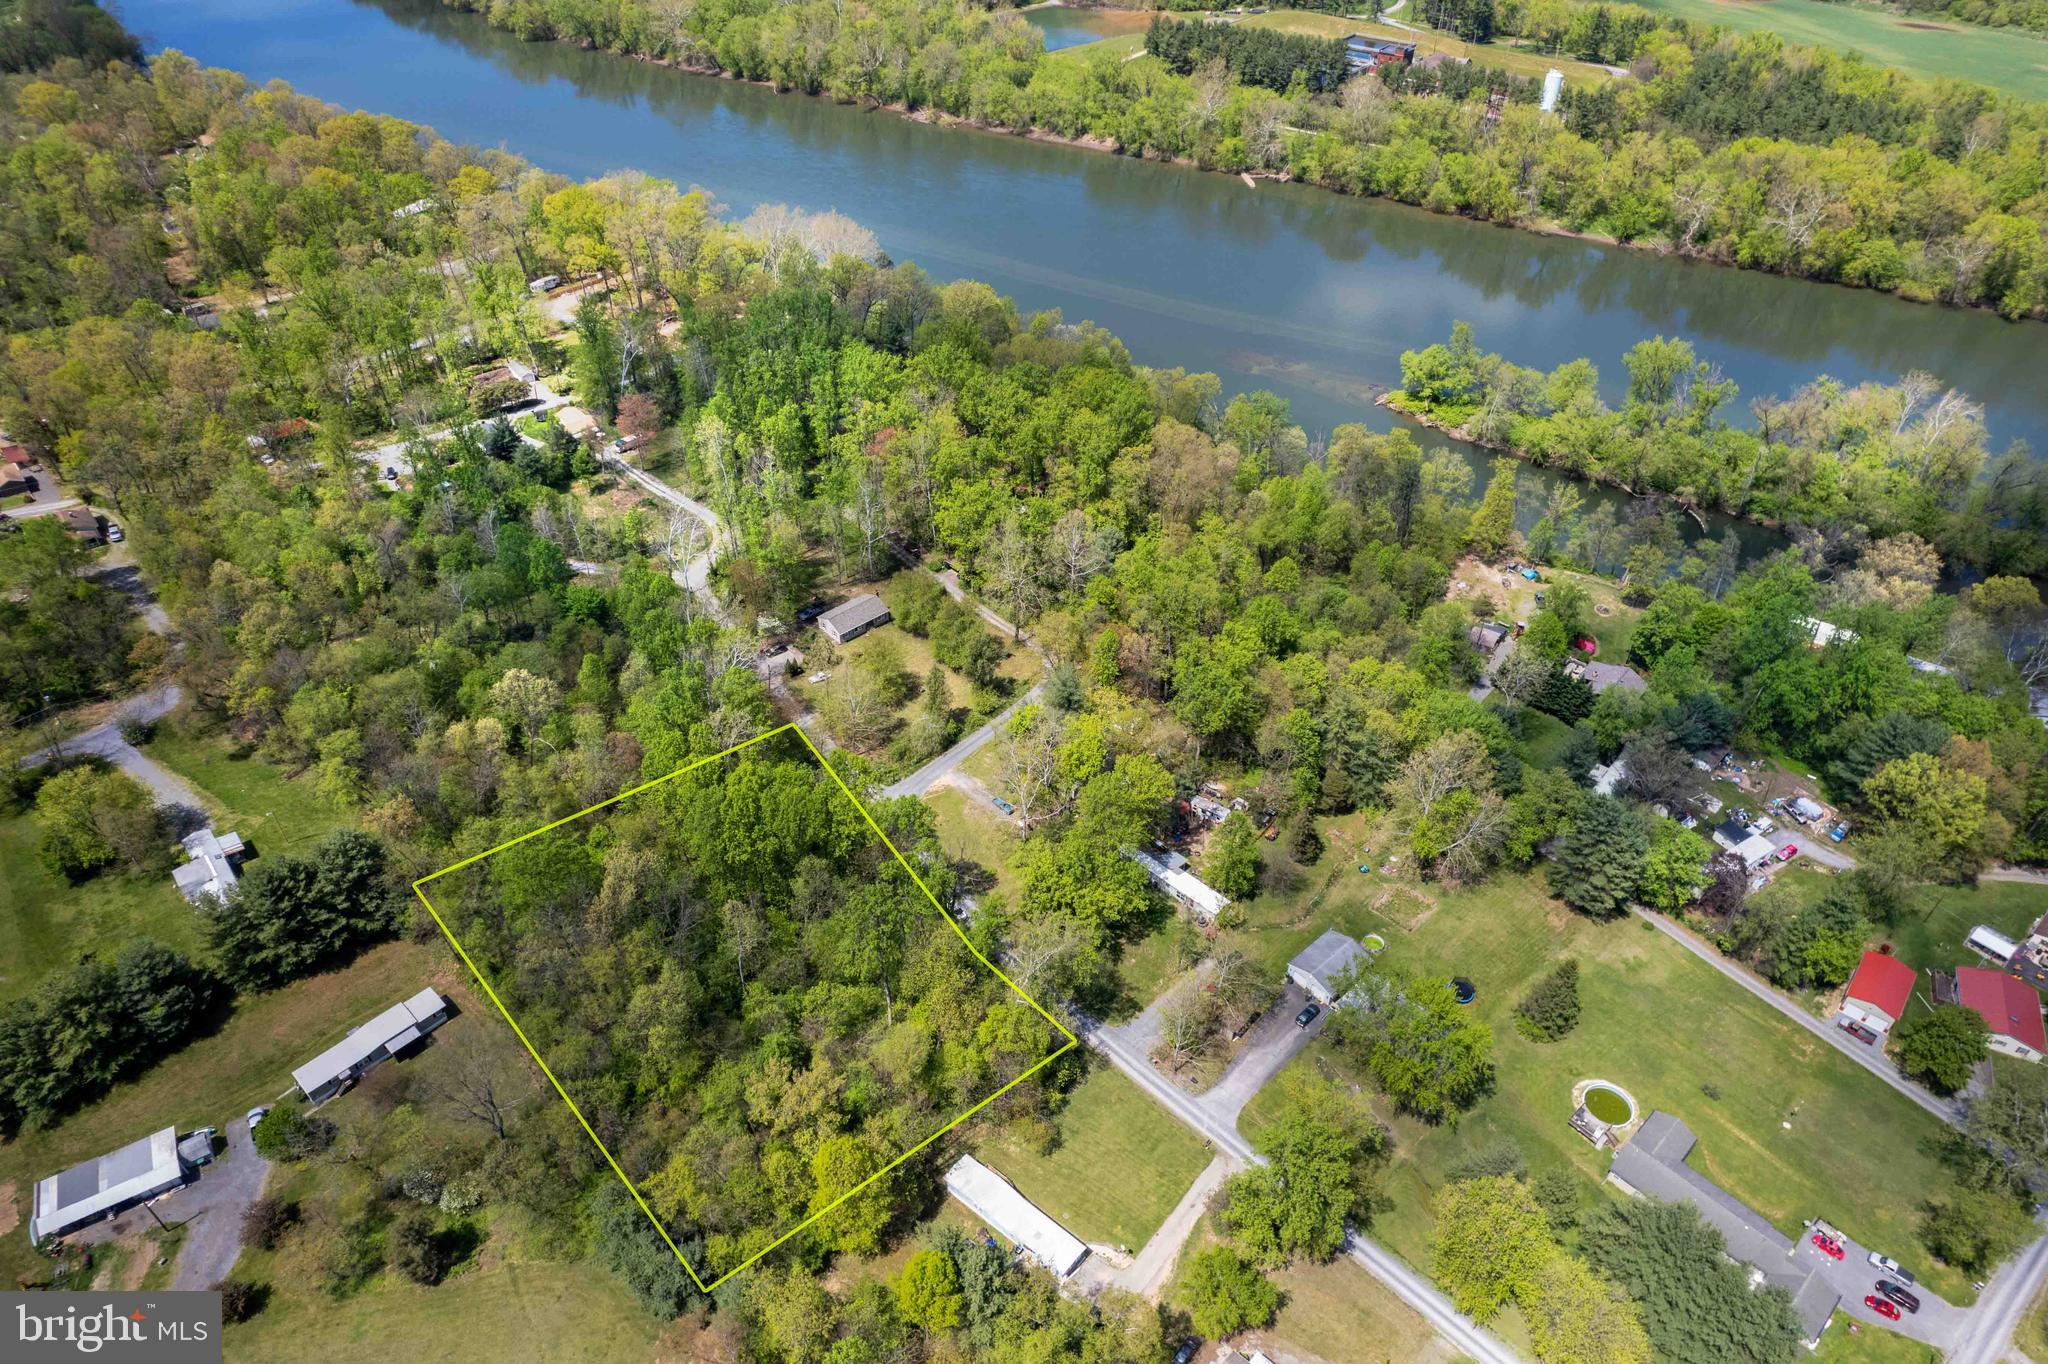 an aerial view of a houses with swimming pool and lake view